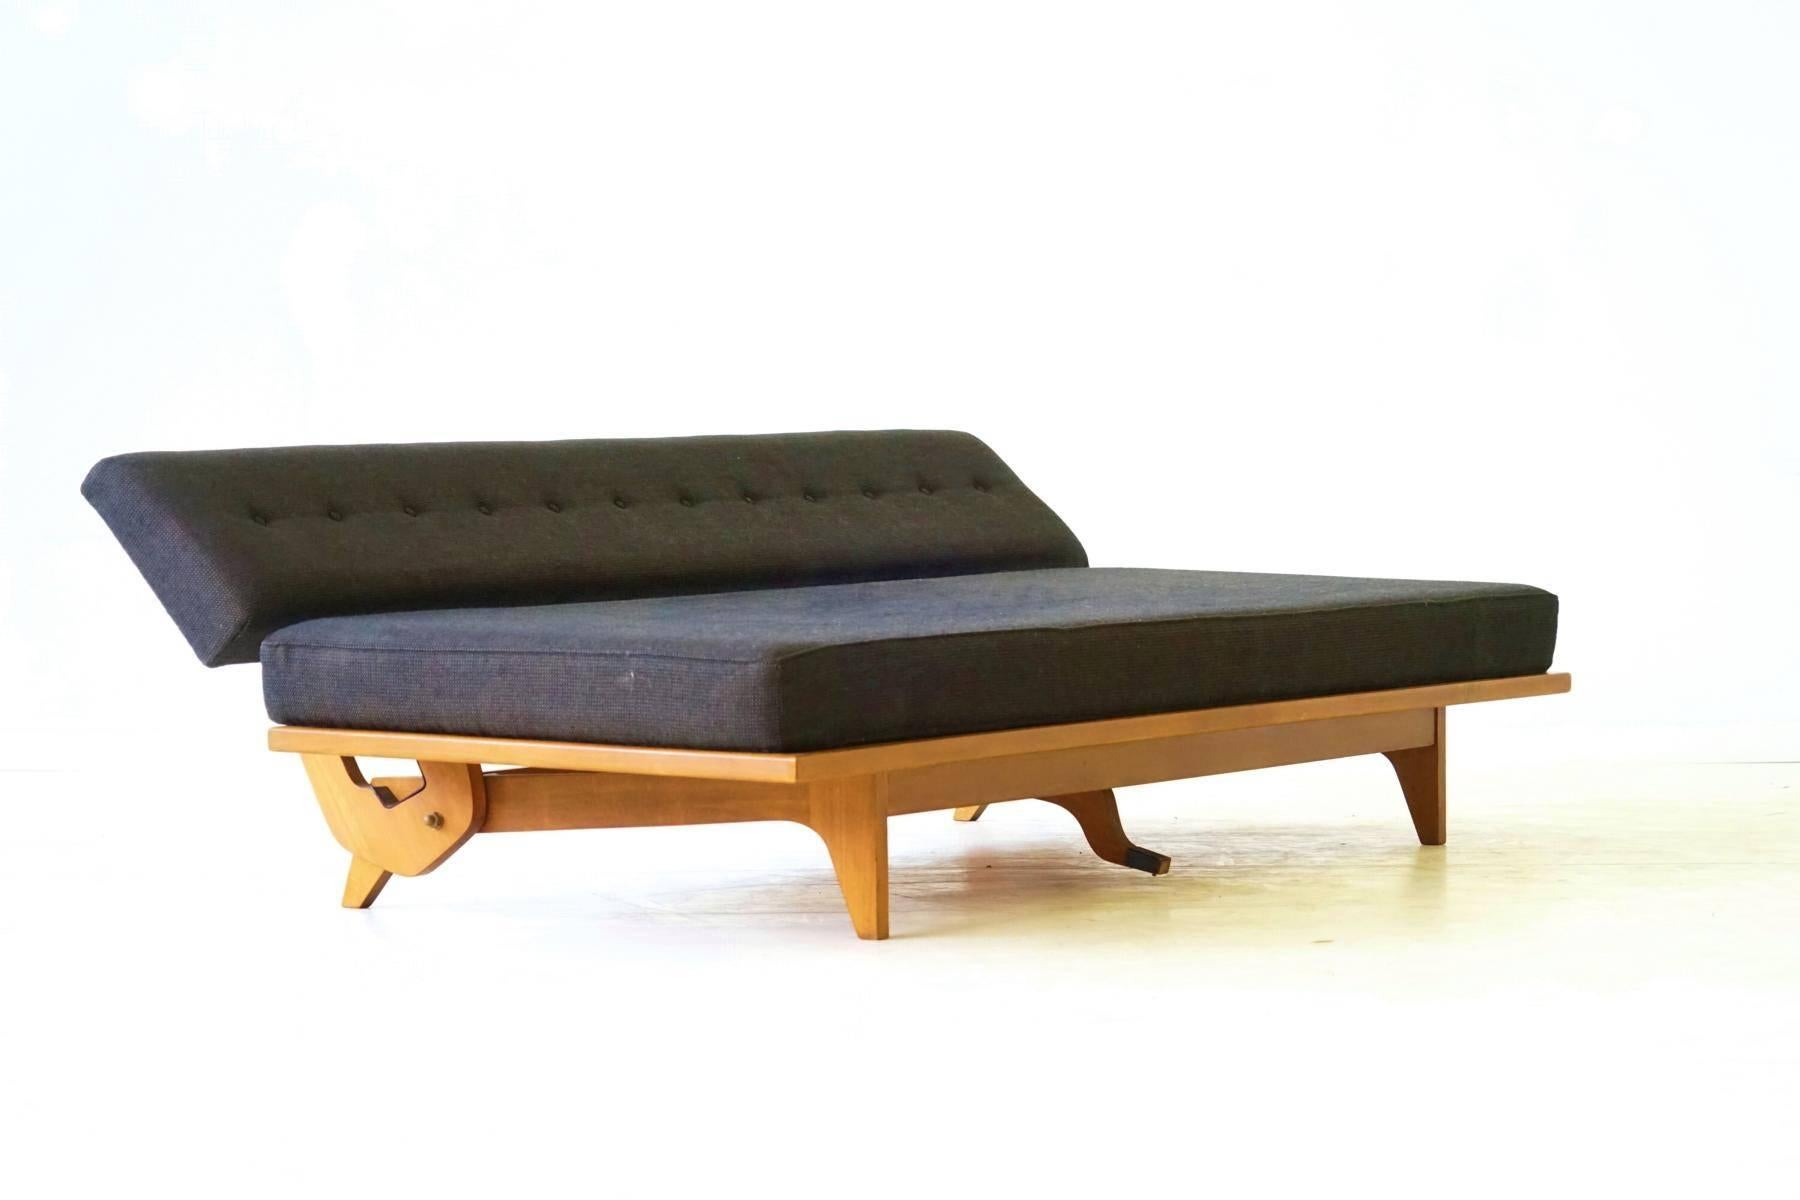 20th Century Folding Sofa Daybed No. 700 by Richard Stein for Knoll International, 1947